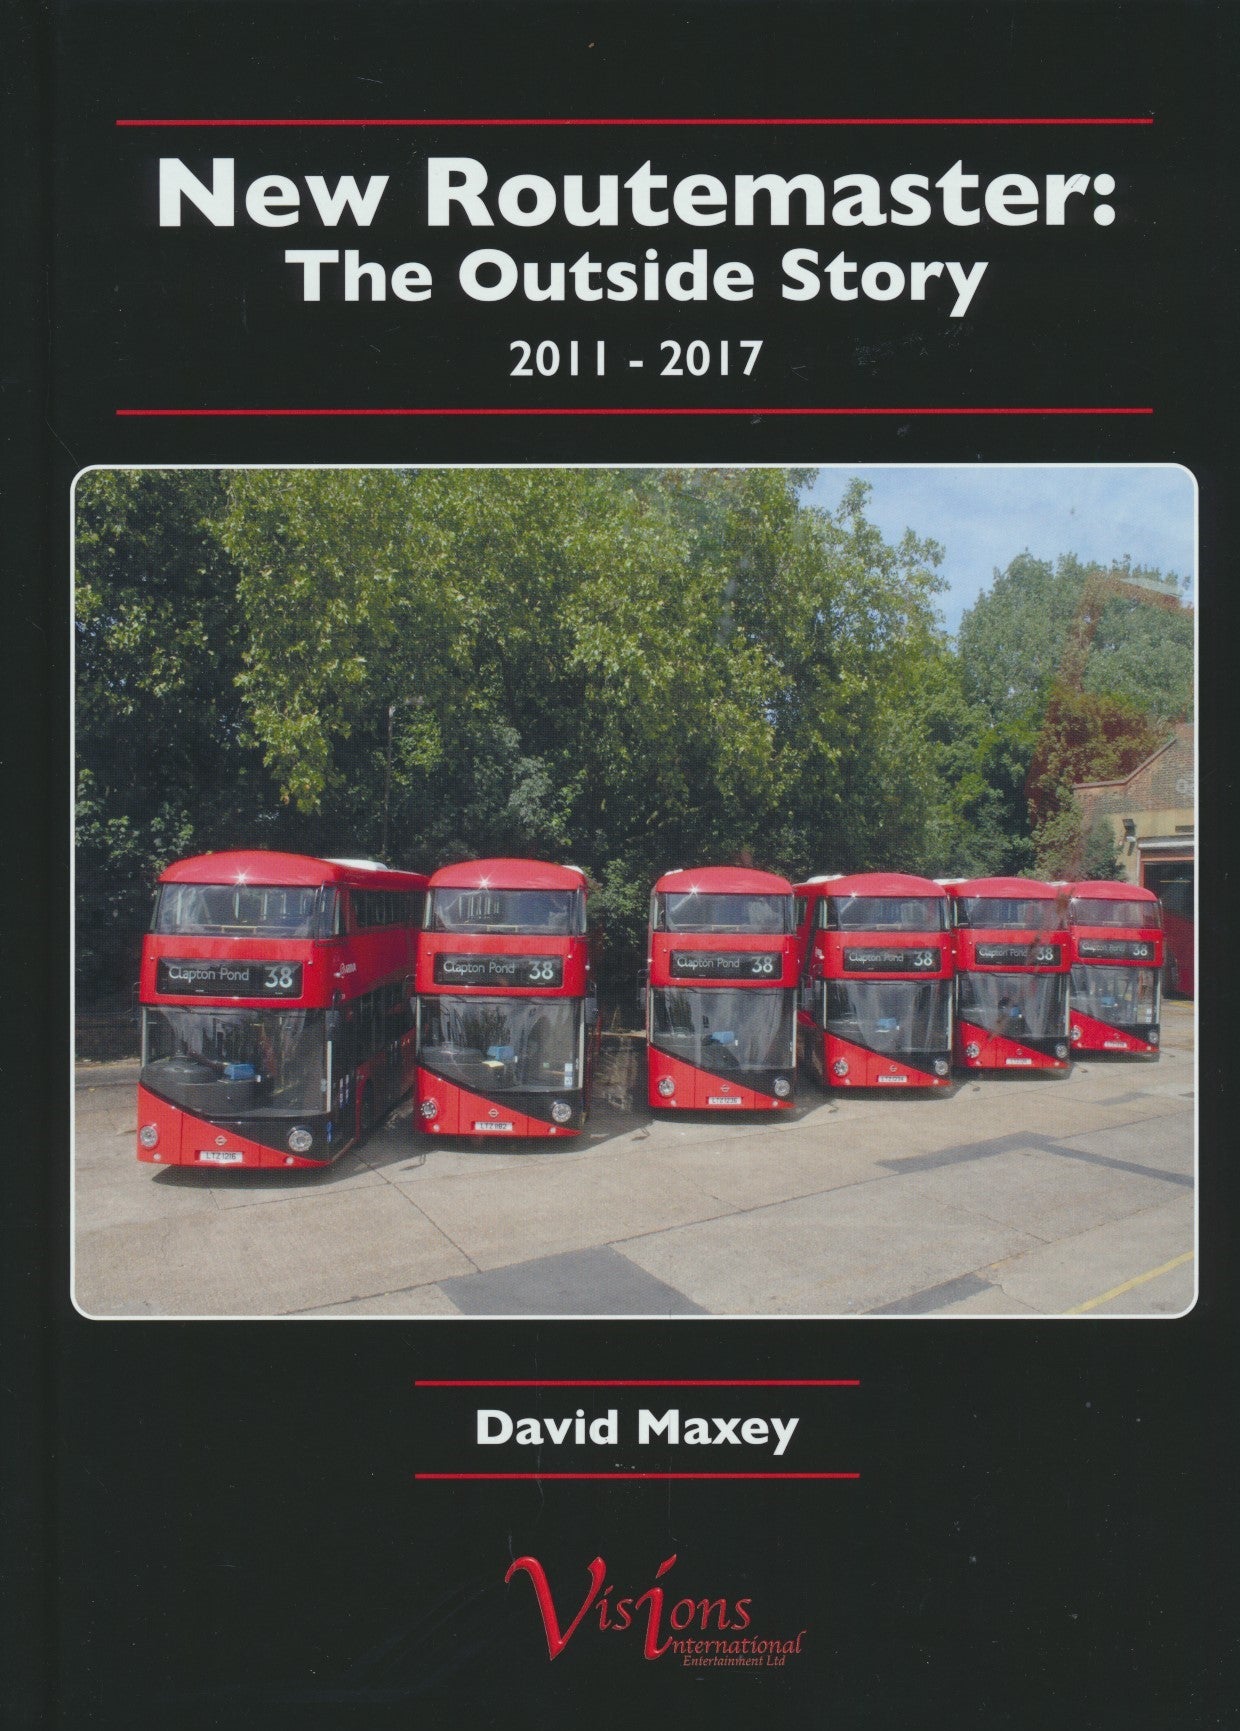 New Routemaster - The Outside Story 2011 - 2017